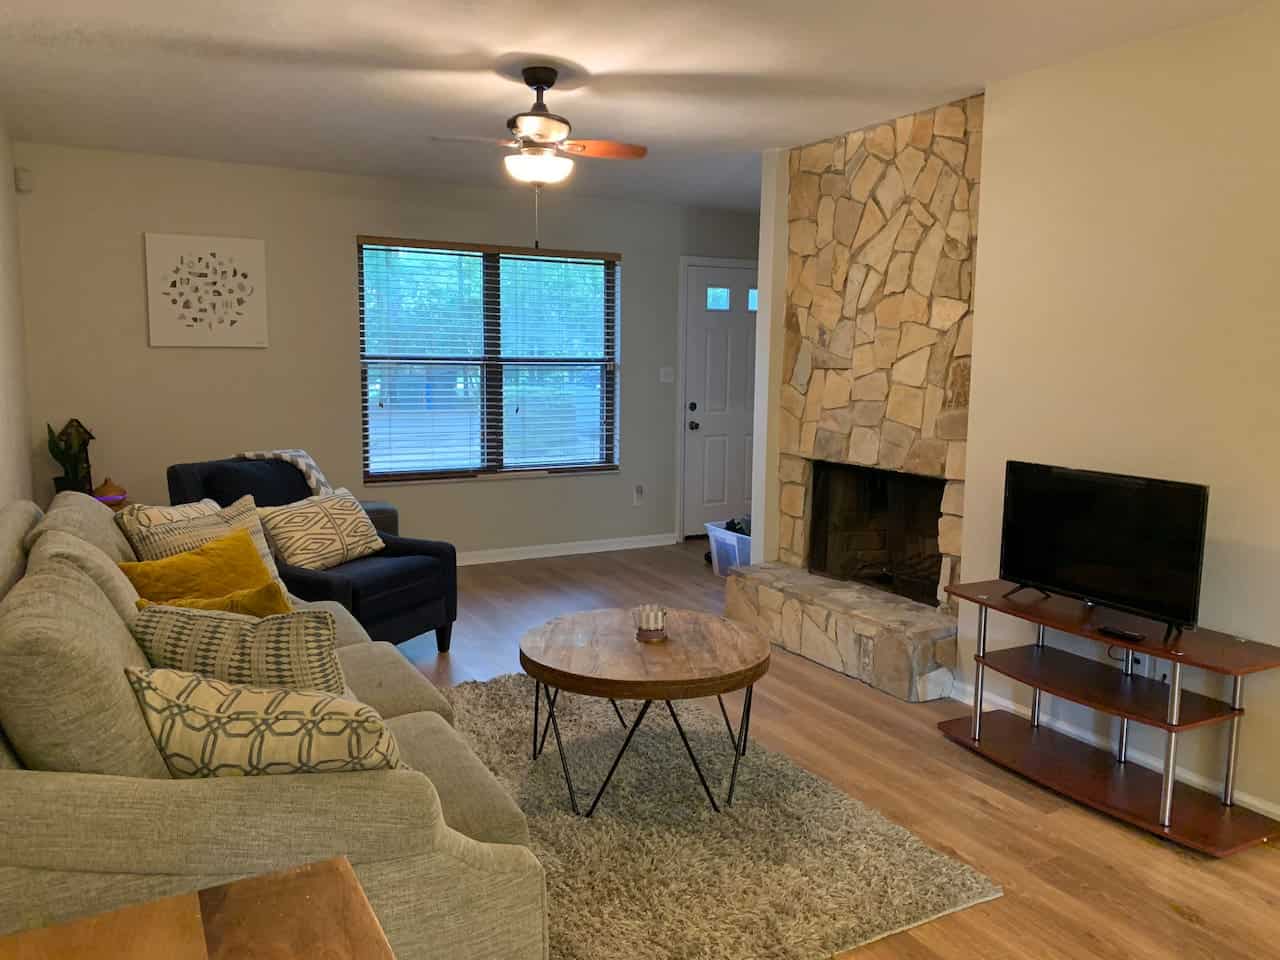 Image of Airbnb rental in Tallahassee, Florida